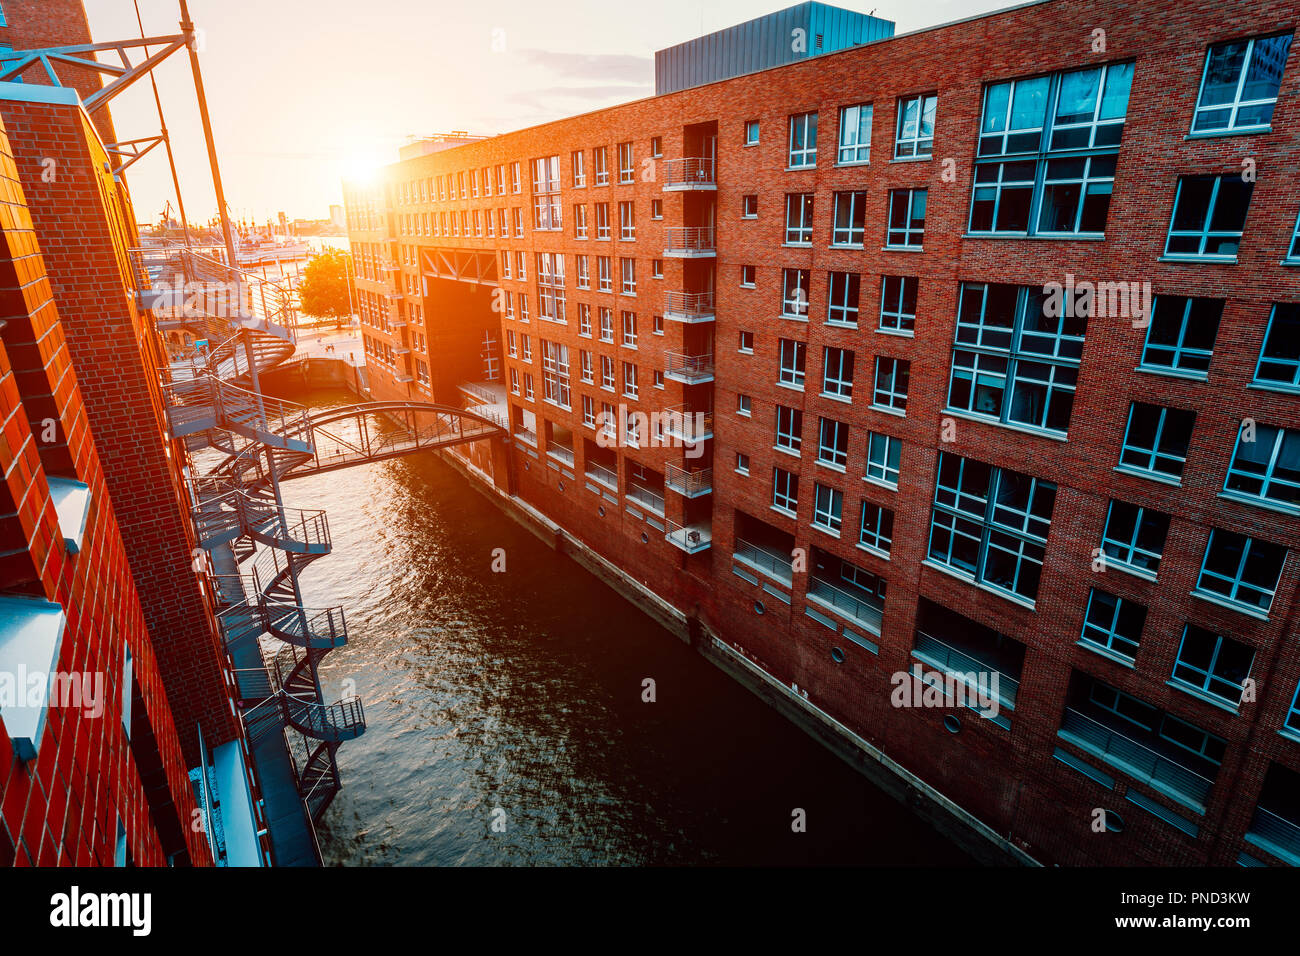 HafenCity canal. Circular staircase, bridge over canal and red brick buildings in the old warehouse district Speicherstadt in Hamburg in golden hour sunset light, Germany. View from above Stock Photo